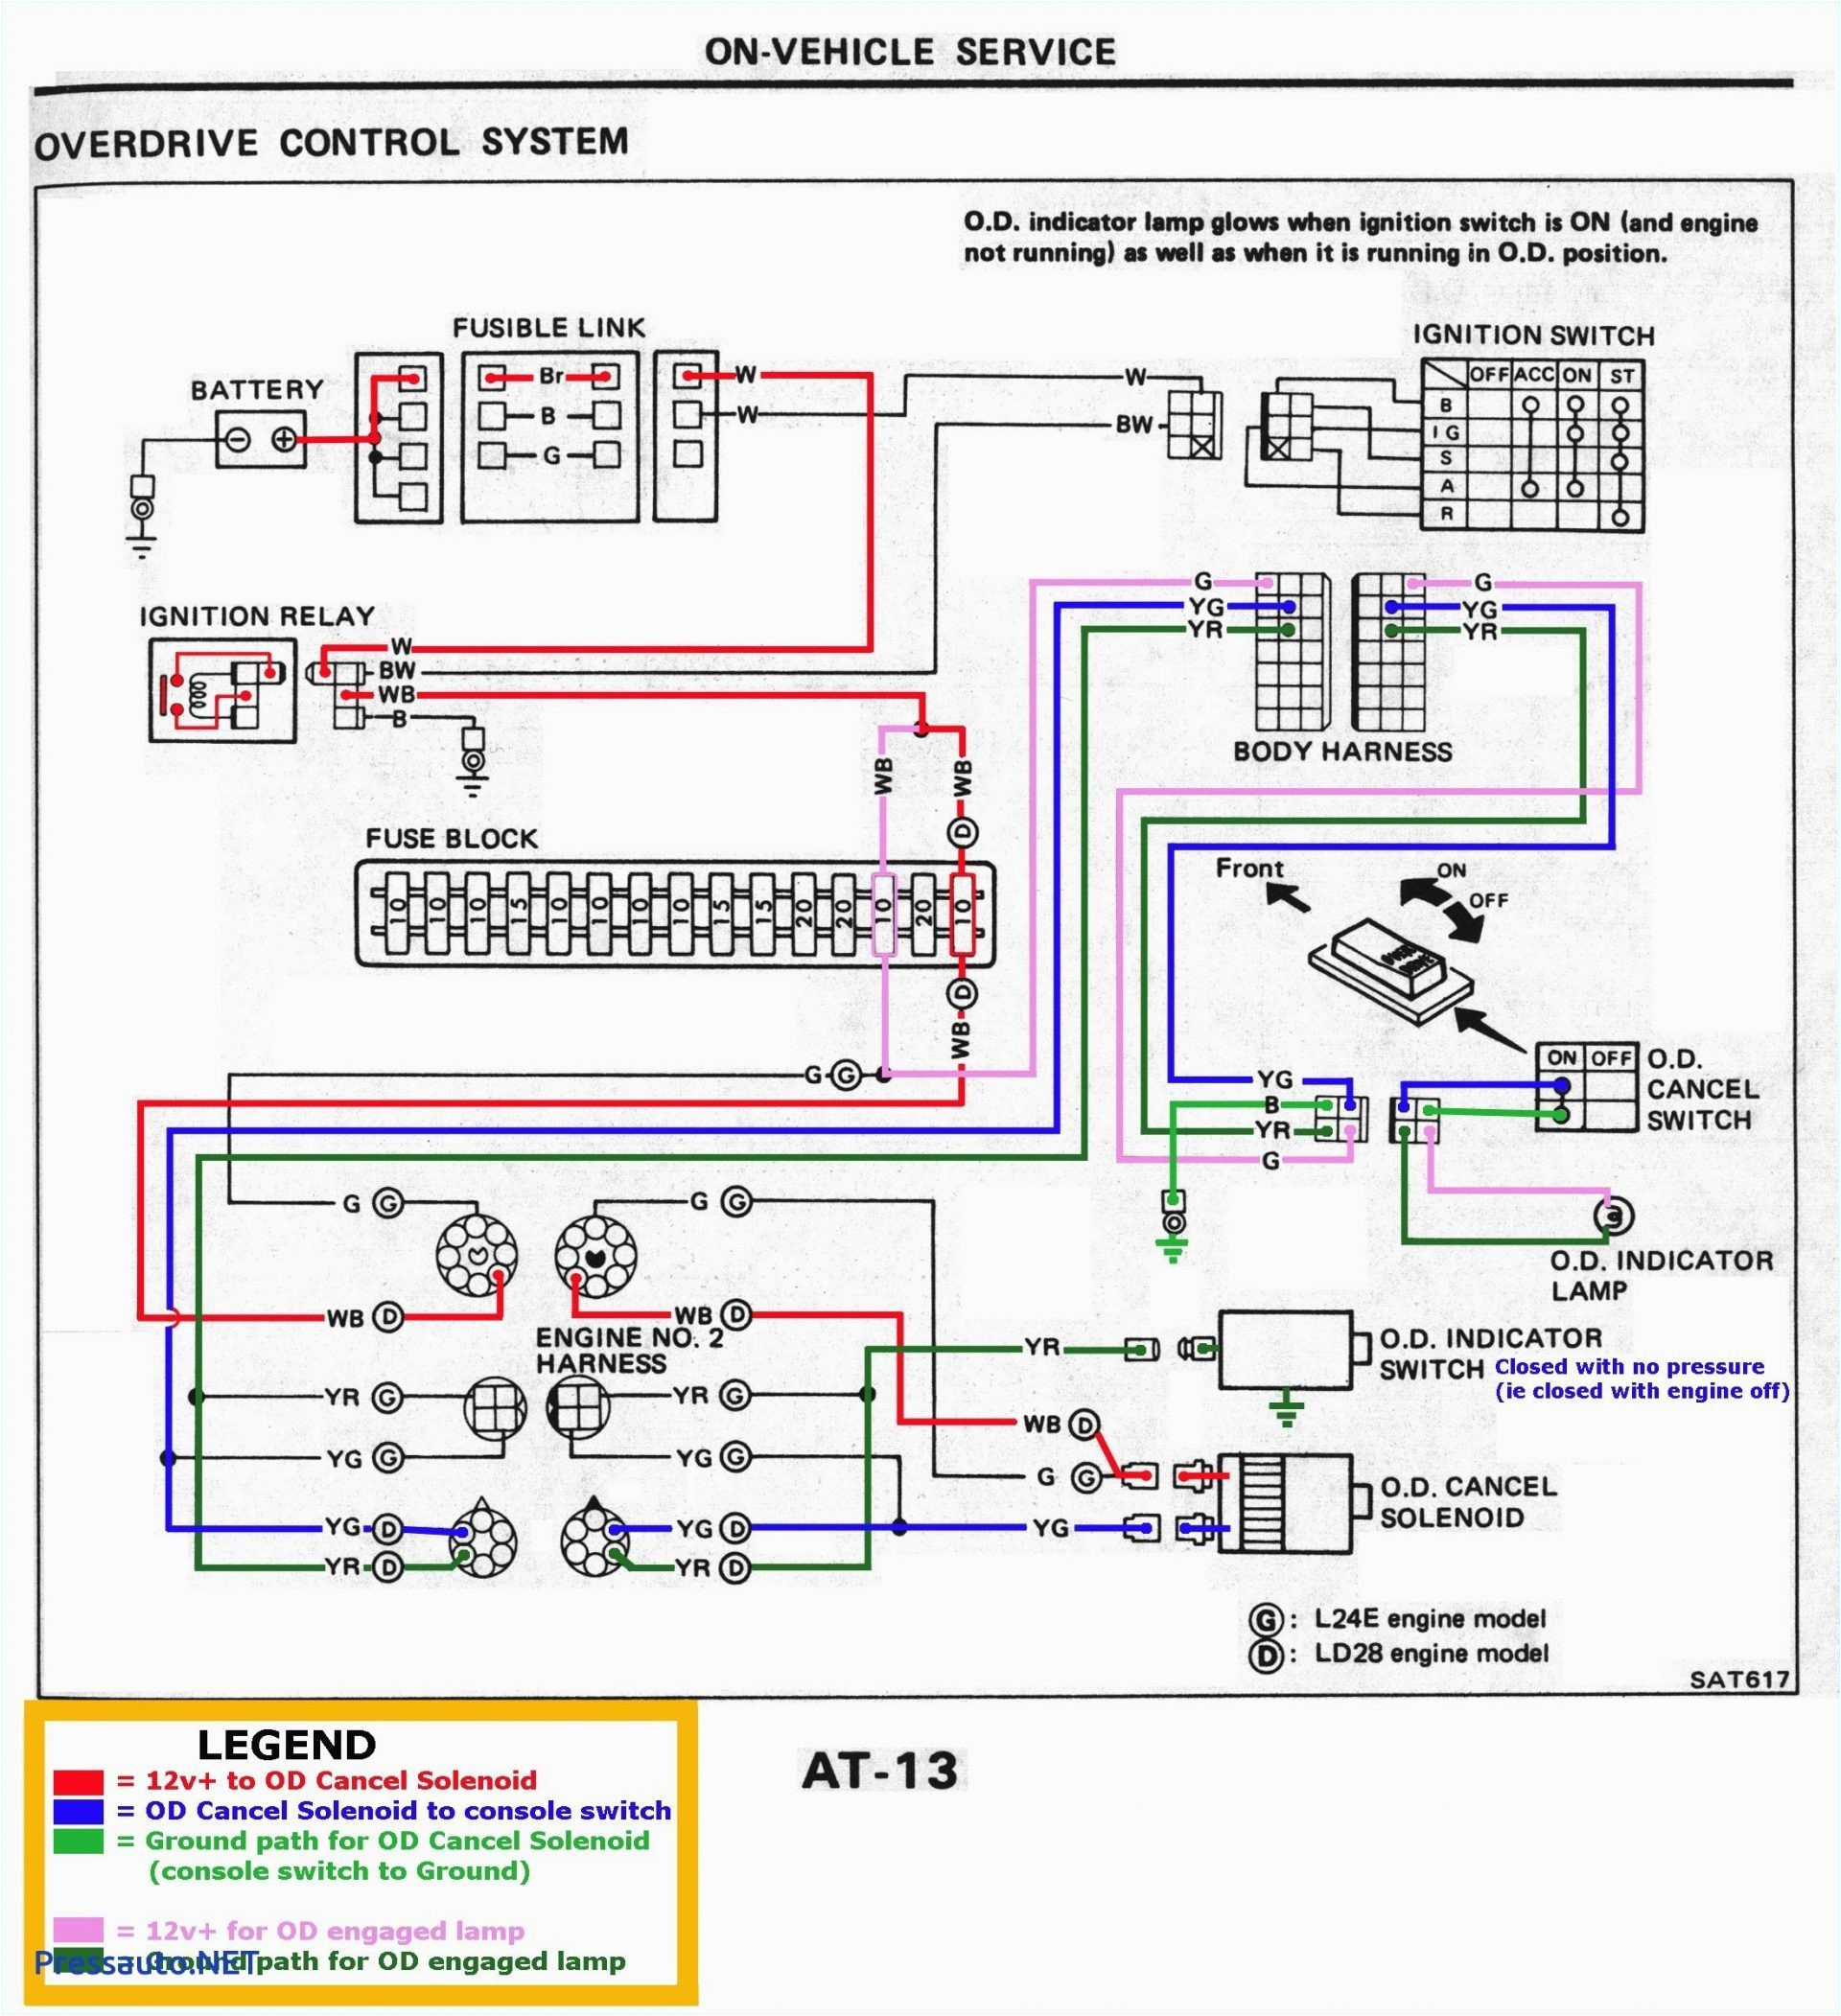 Wiring Diagram for Ignition Switch Ignition Switch Wiring Diagram Color Wiring Diagram Post